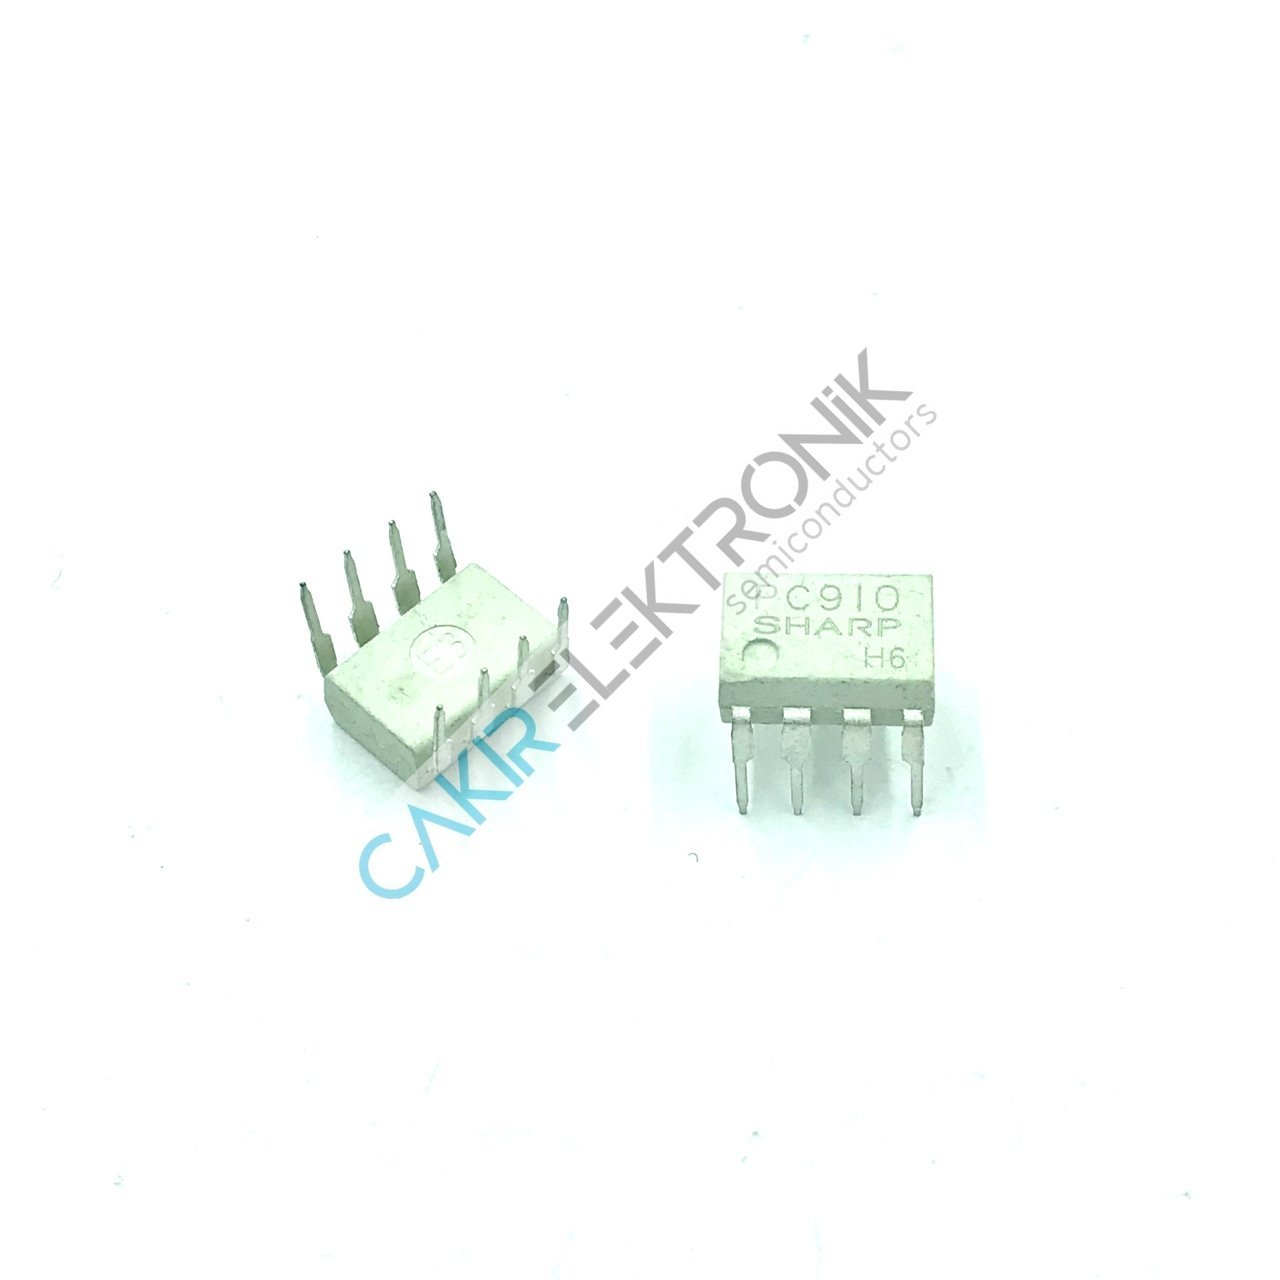 PC910 - PC 910 - Ultra-high Speed Response OPIC Photocoupler